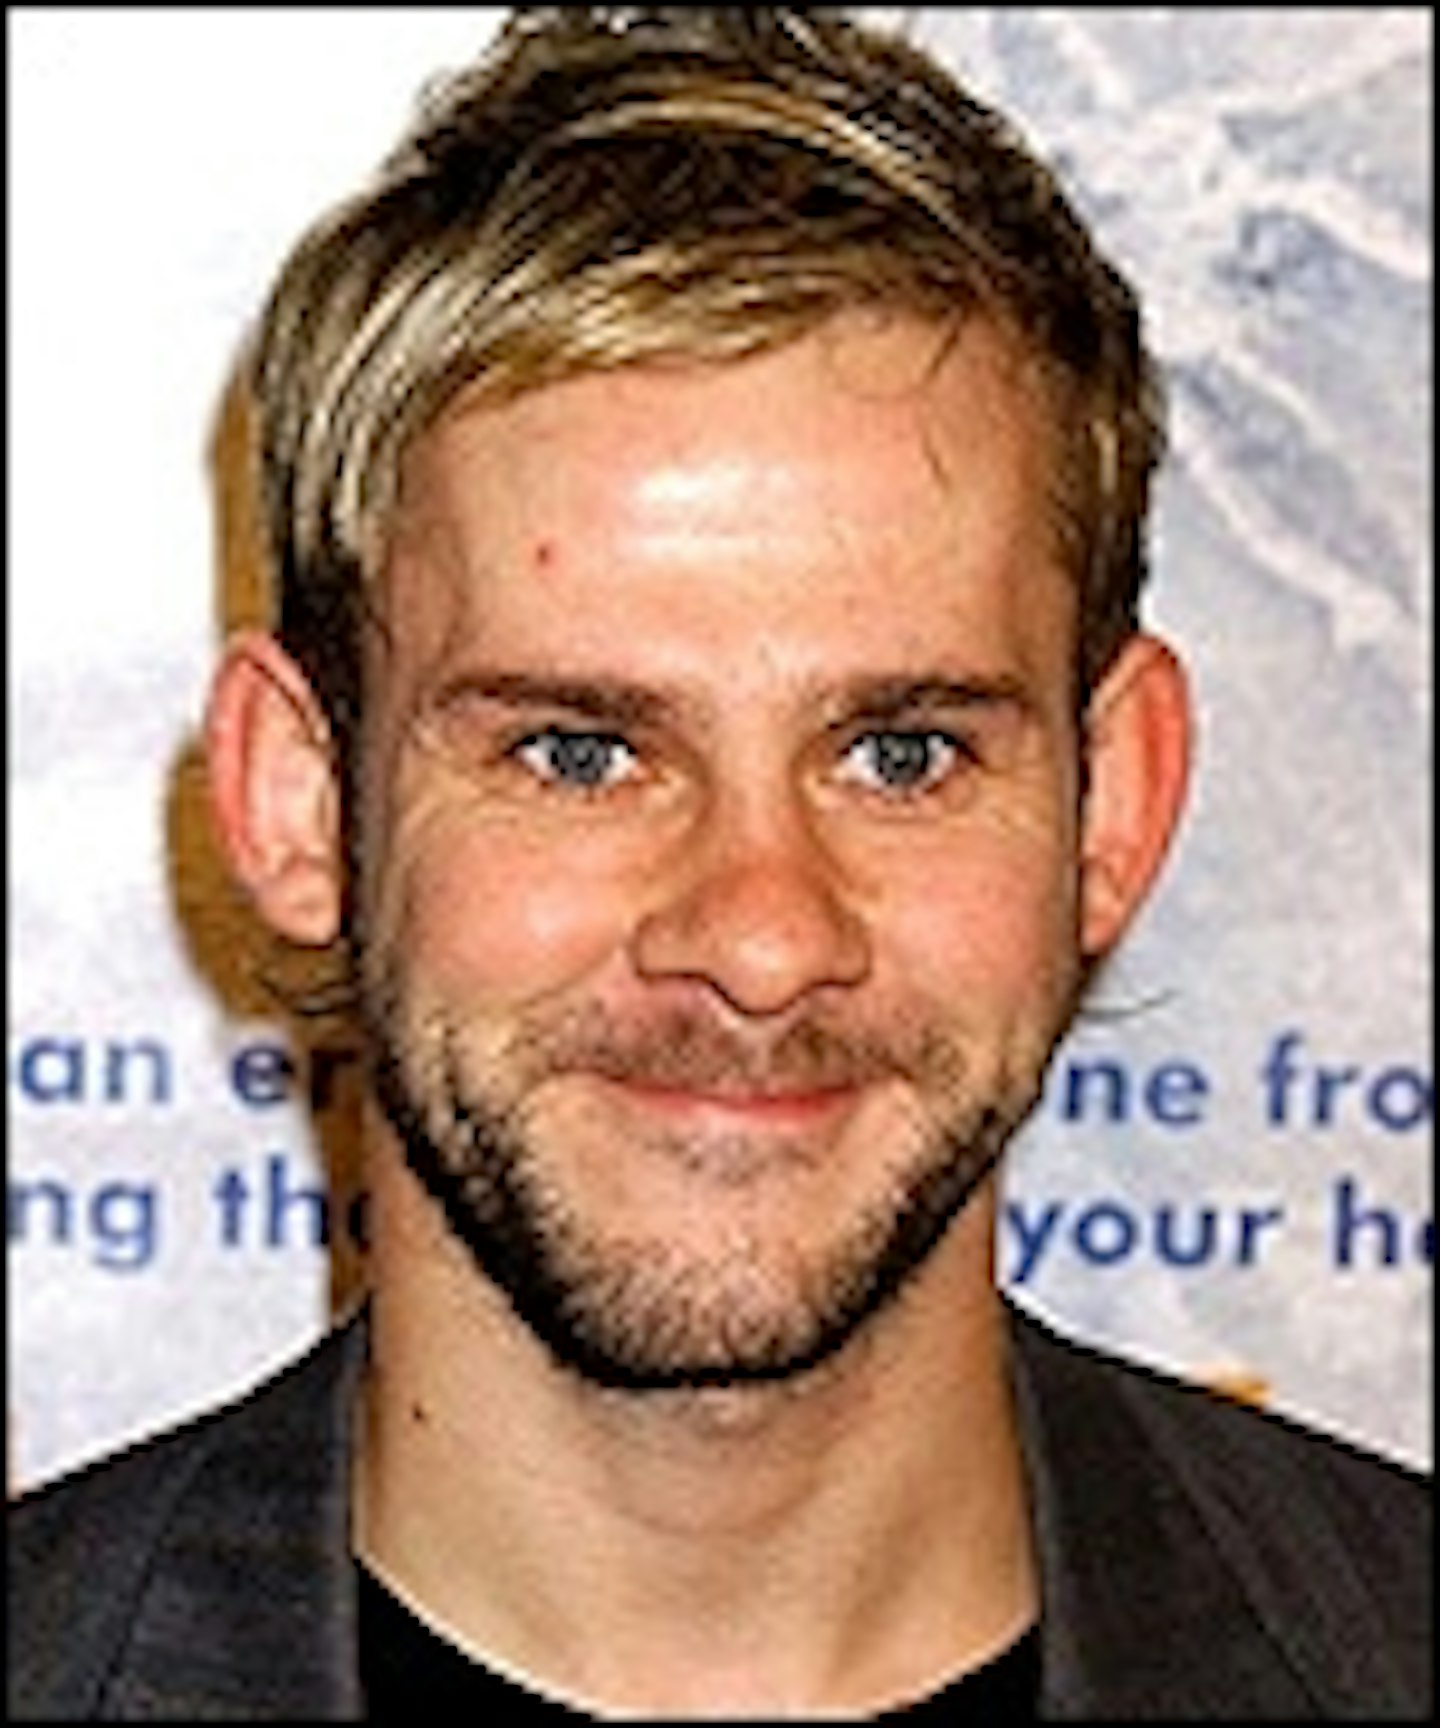 Dominic Monaghan In Wolverine?